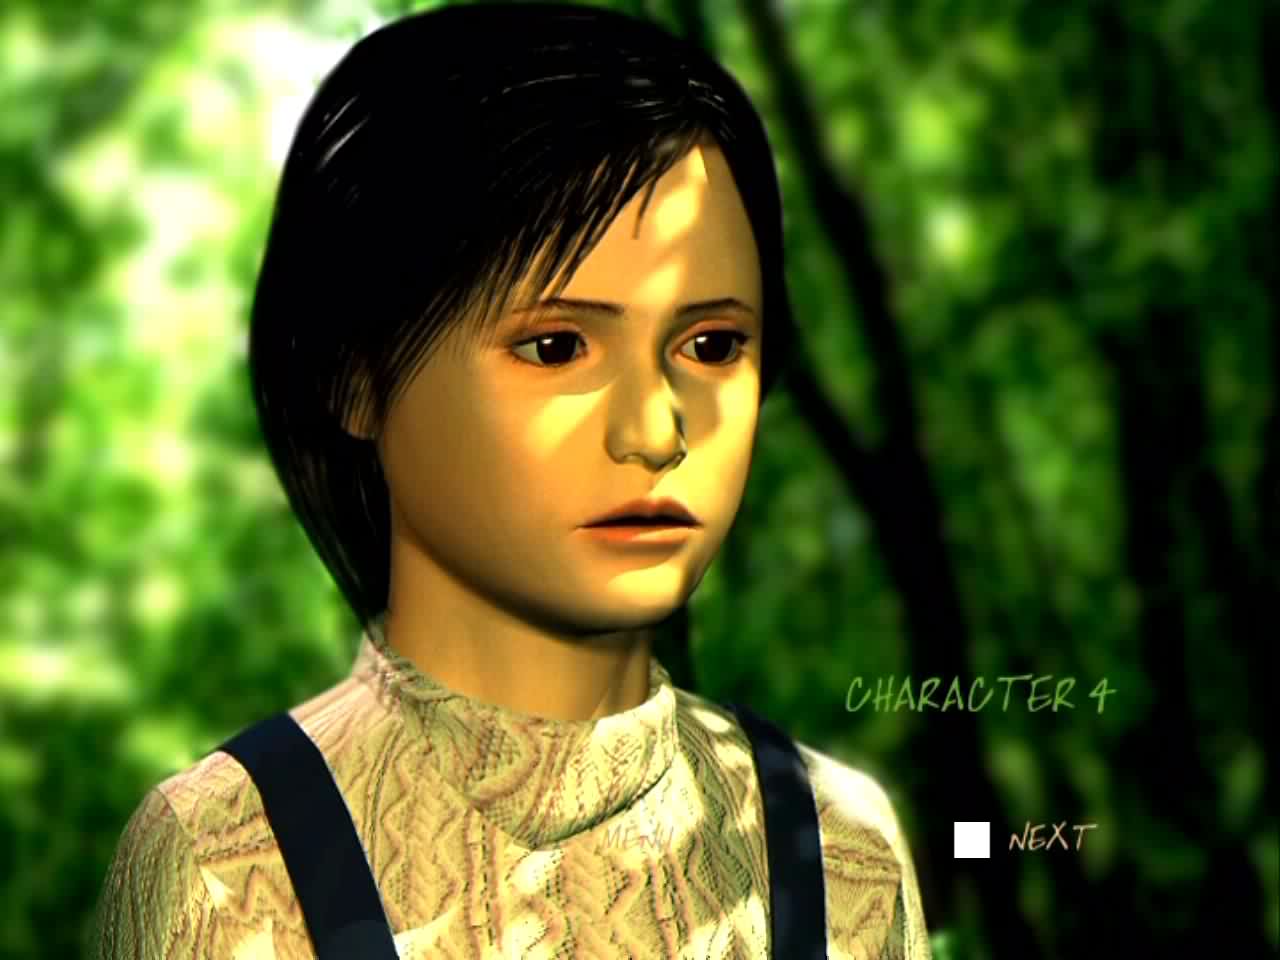 download silent hill 2 lost memories